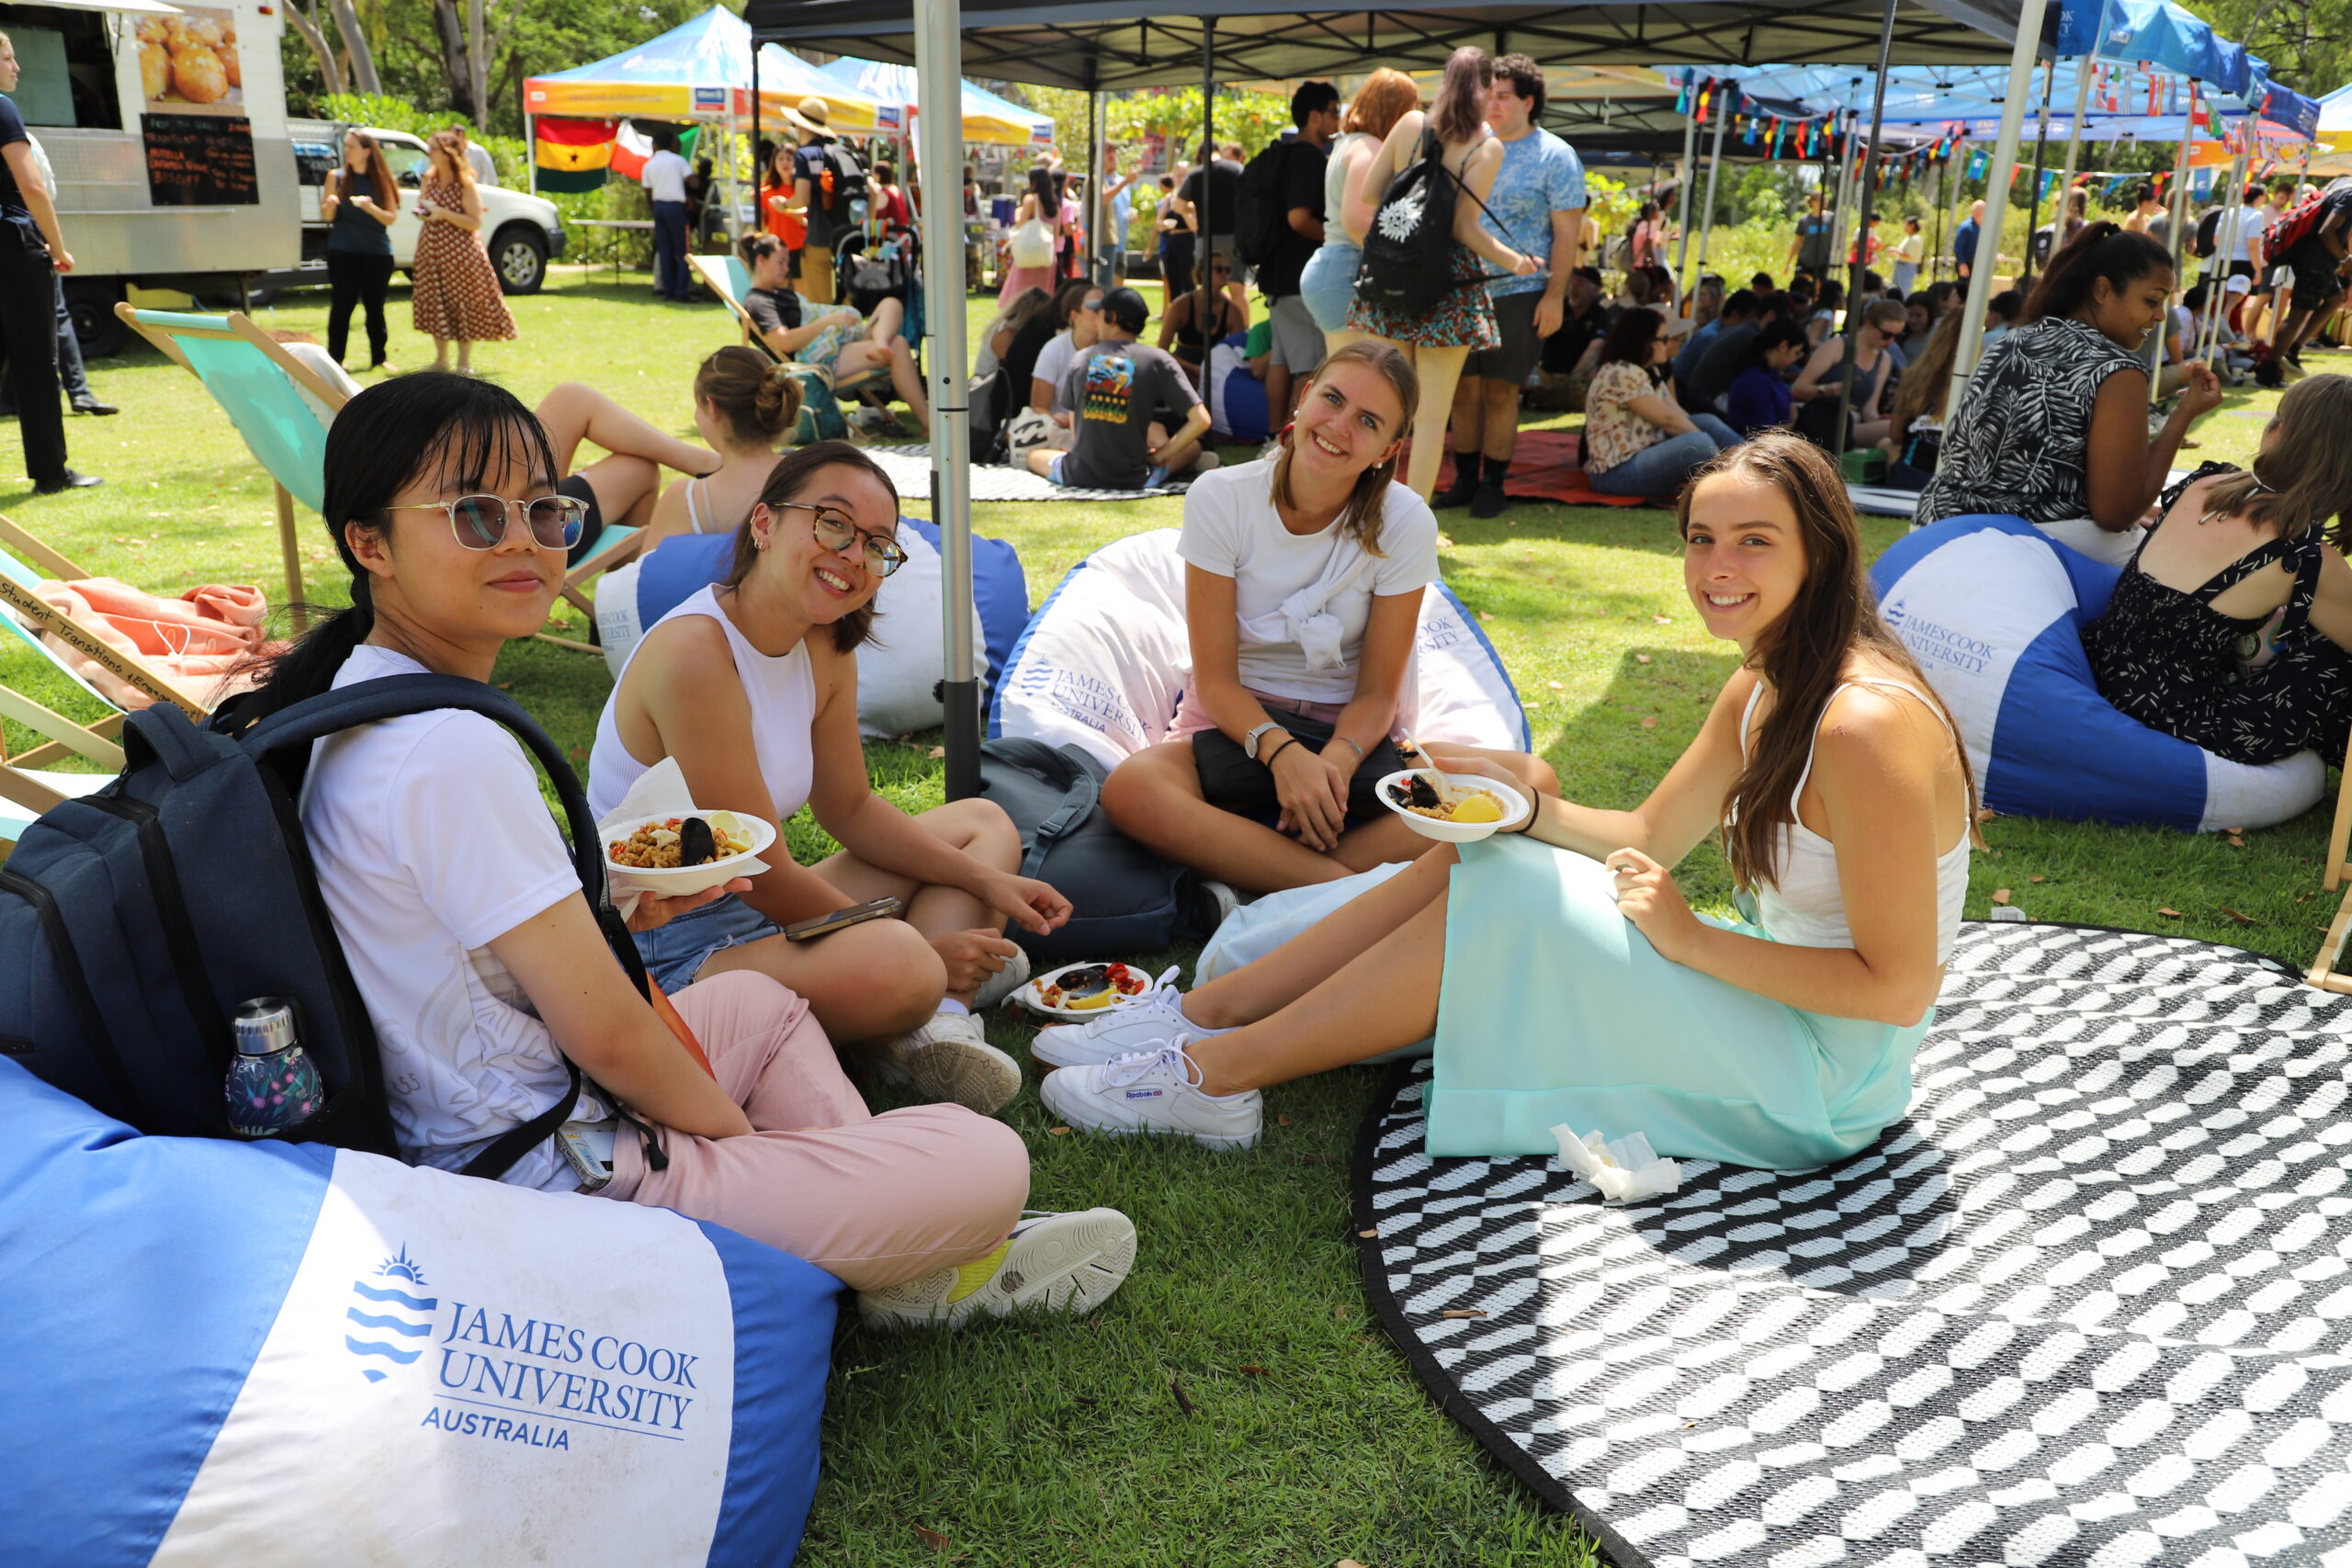 Throughout the year, students can get involved in on-campus events which include foods, drinks and fun activities